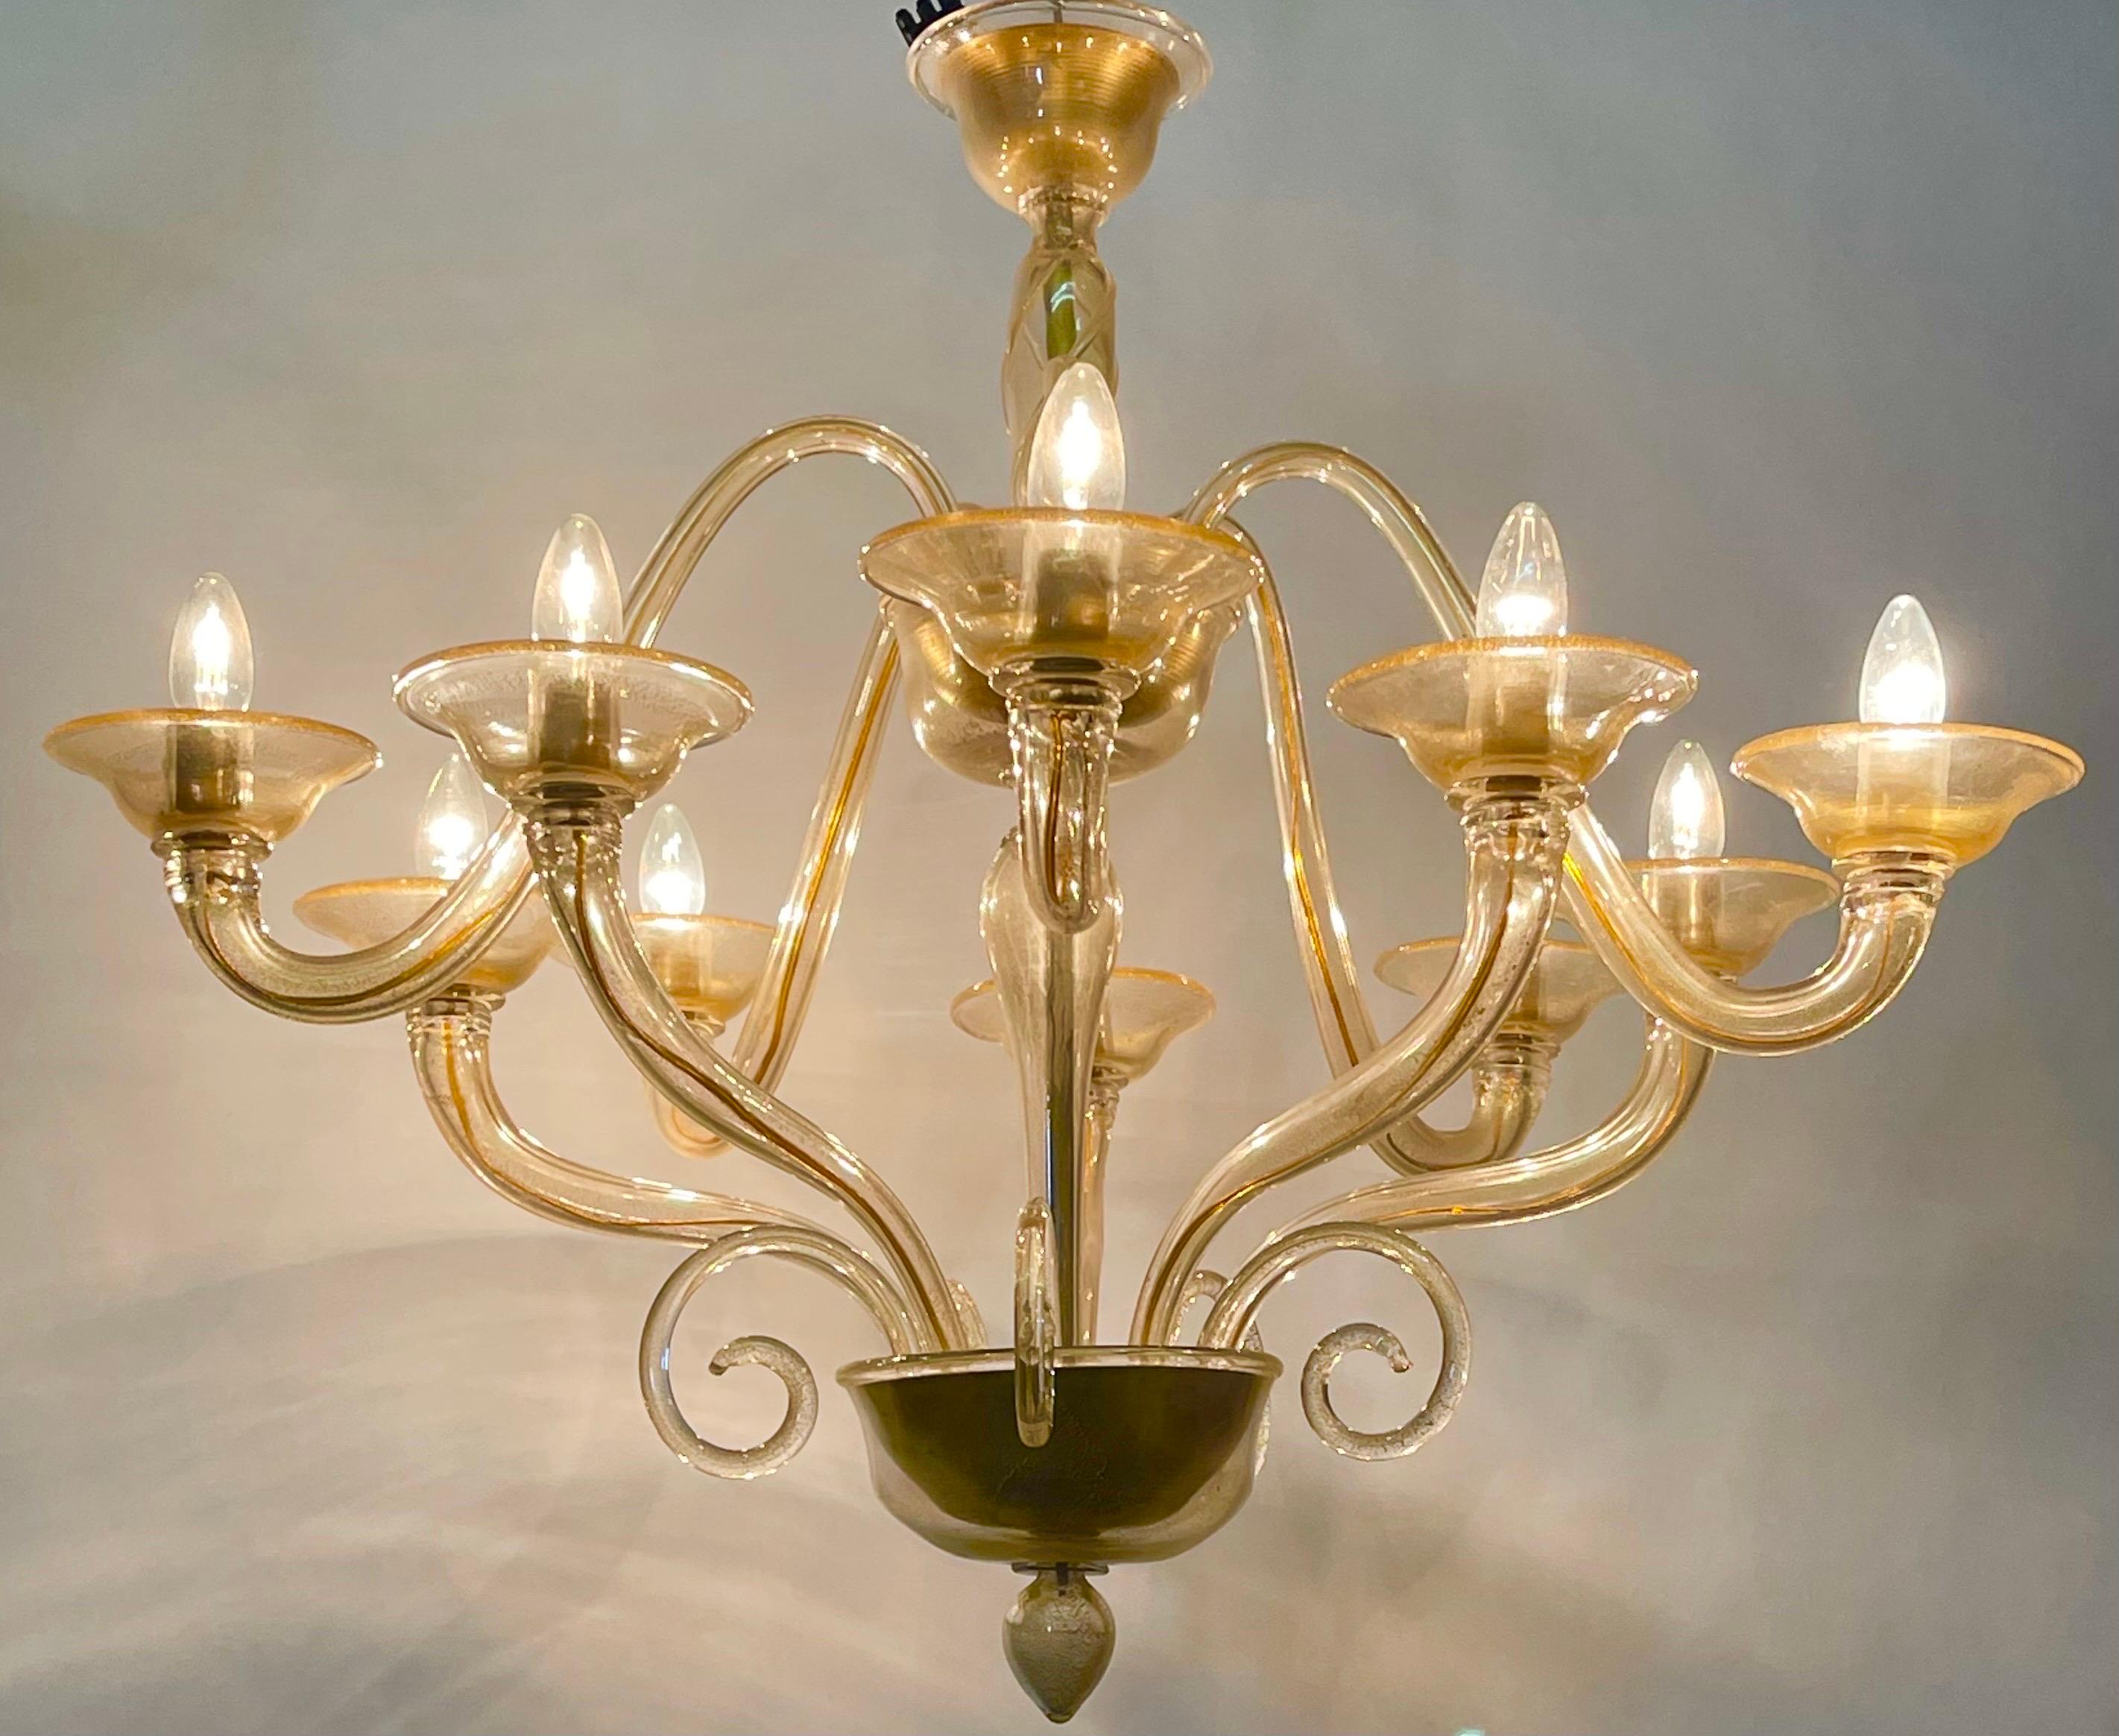 Gold Dusted Handblown Murano Glass Chandelier by Seguso, circa 1960s For Sale 5